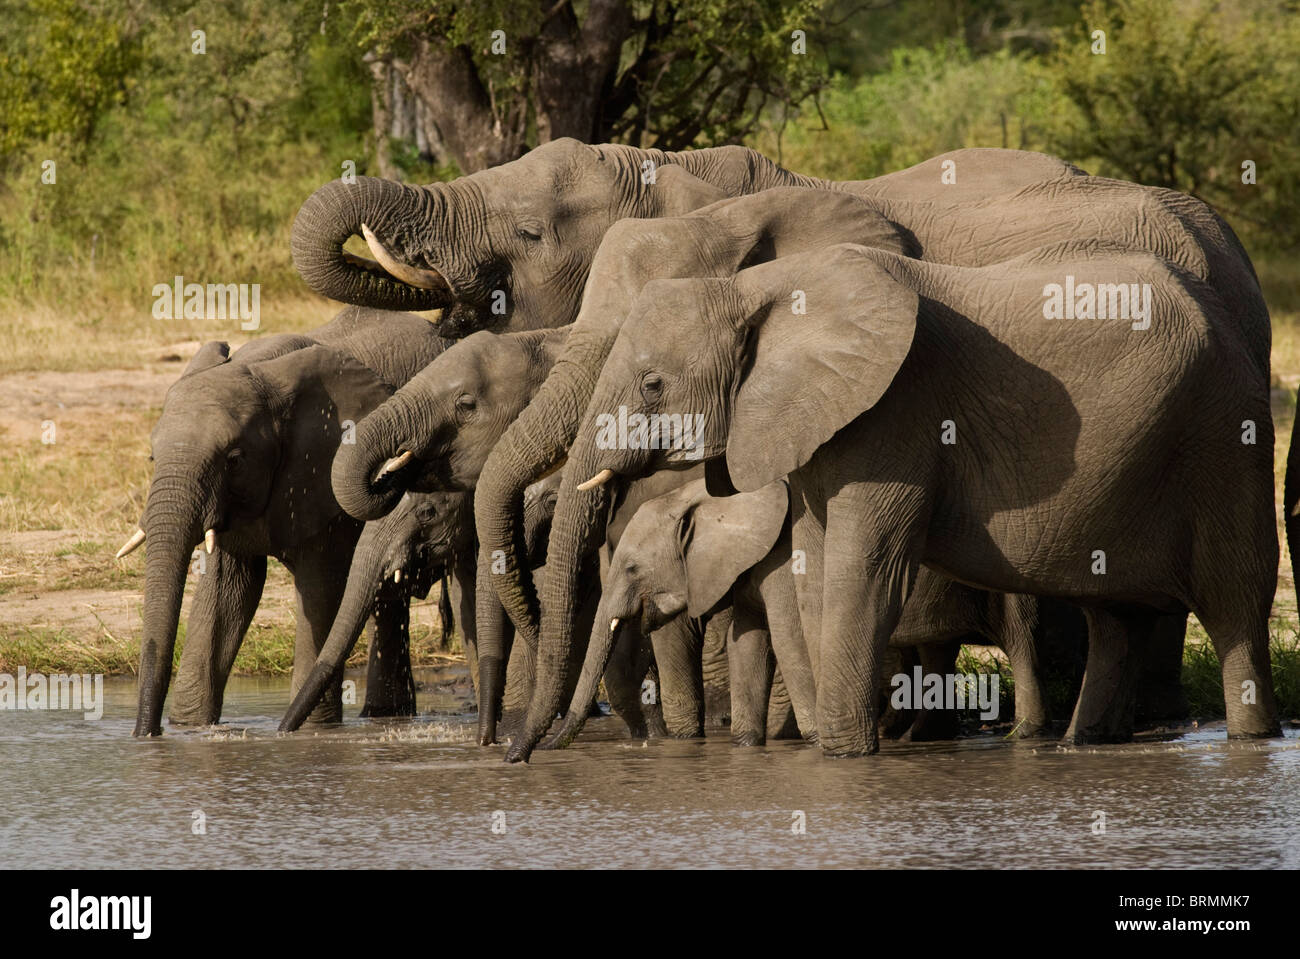 Side view of elephants with outstretched and curled trunks drinking water from waterhole Stock Photo